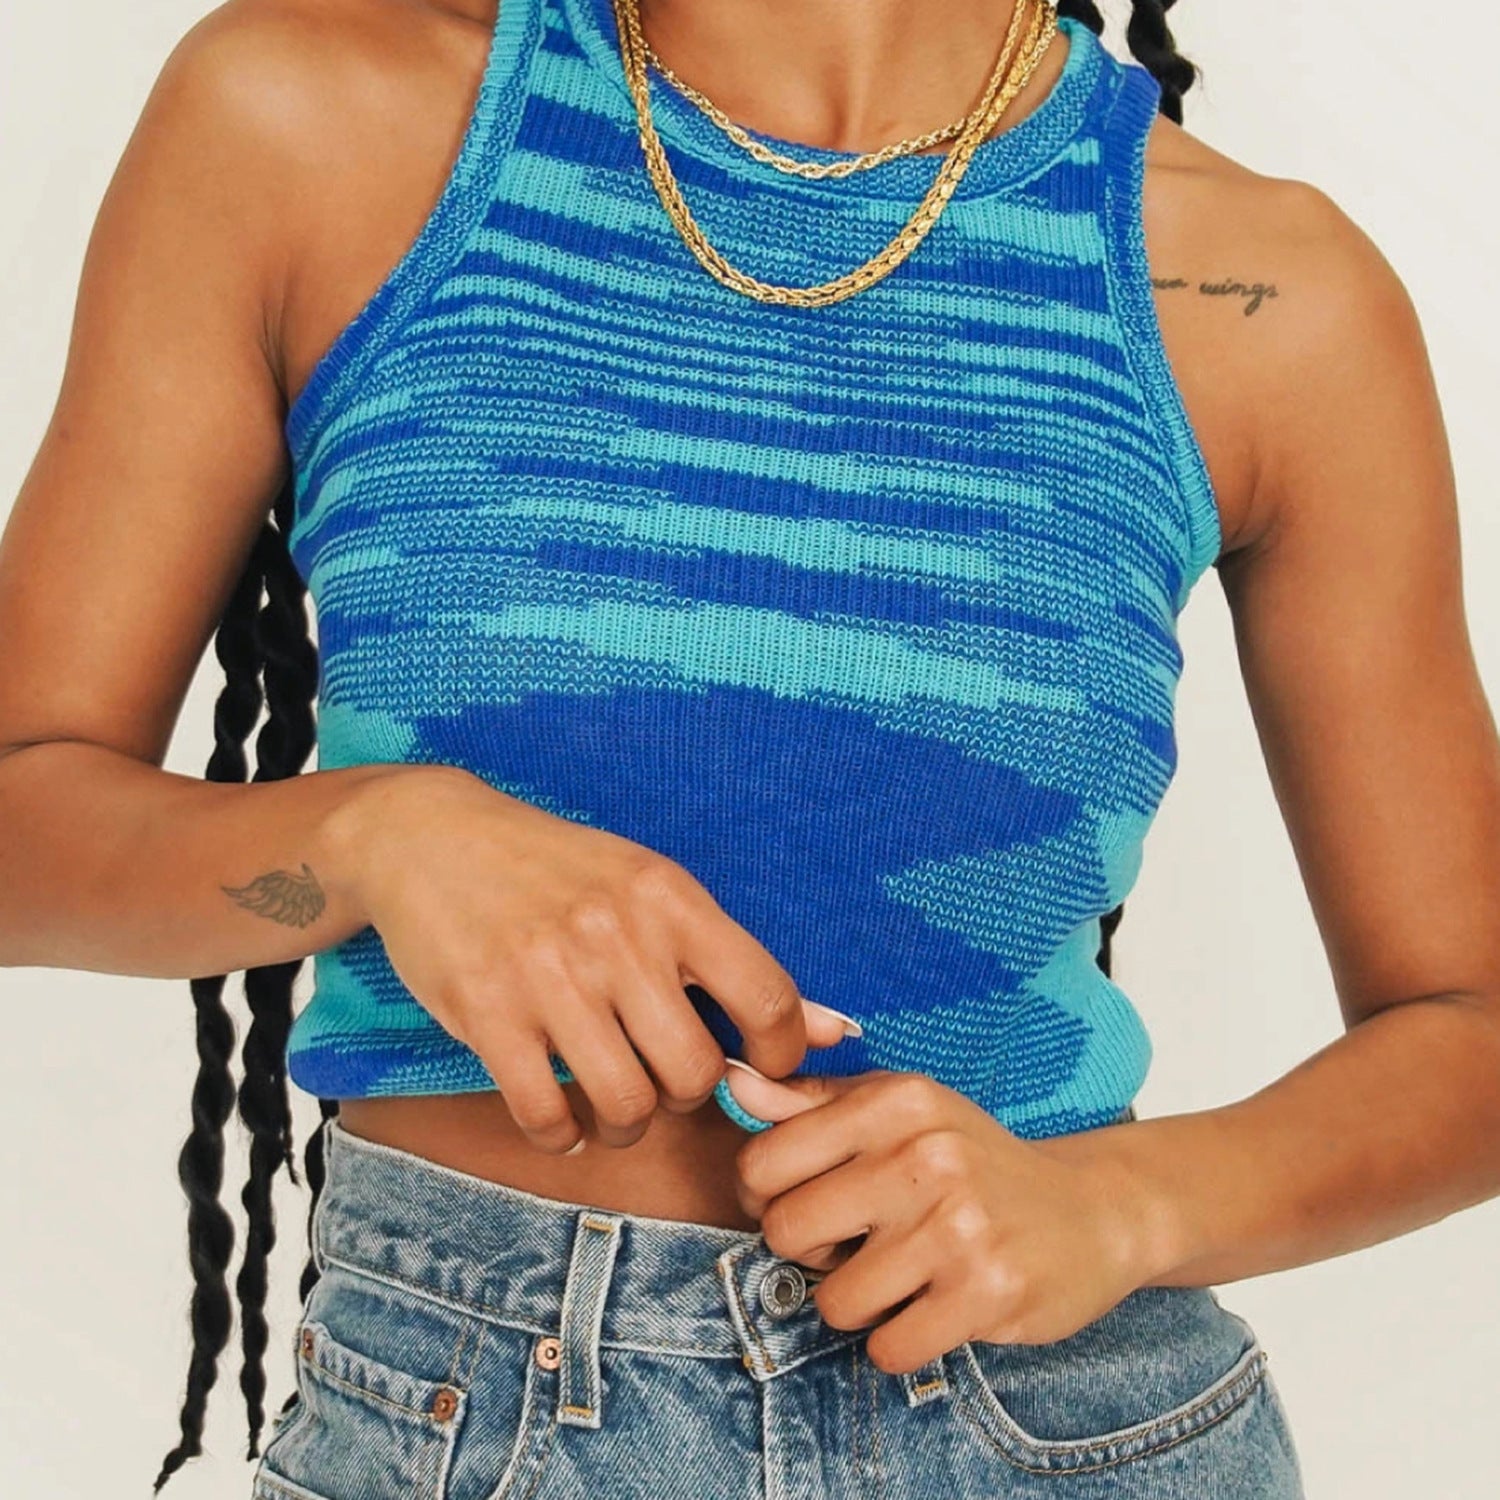 Colorful Stretch KnitRainbow Tie Dye Knitted High Neck Tank Top